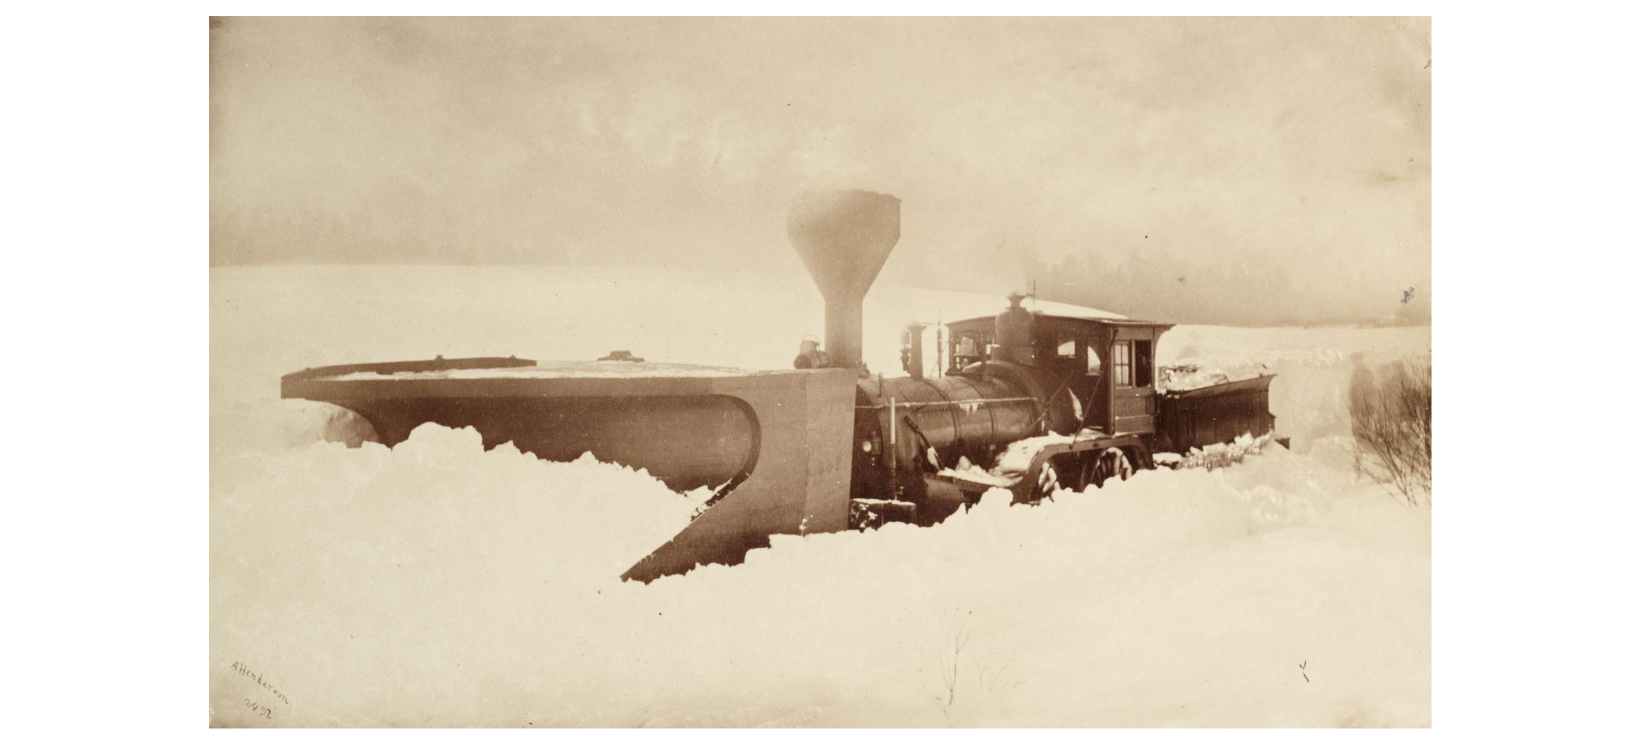 An albumen print of a Grand Trunk Railroad snow plough, St-Agapit, Quebec. February, 1869. Photo credit: Alexander Henderson. Photo from the Digital Archives of the Toronto Public Library.